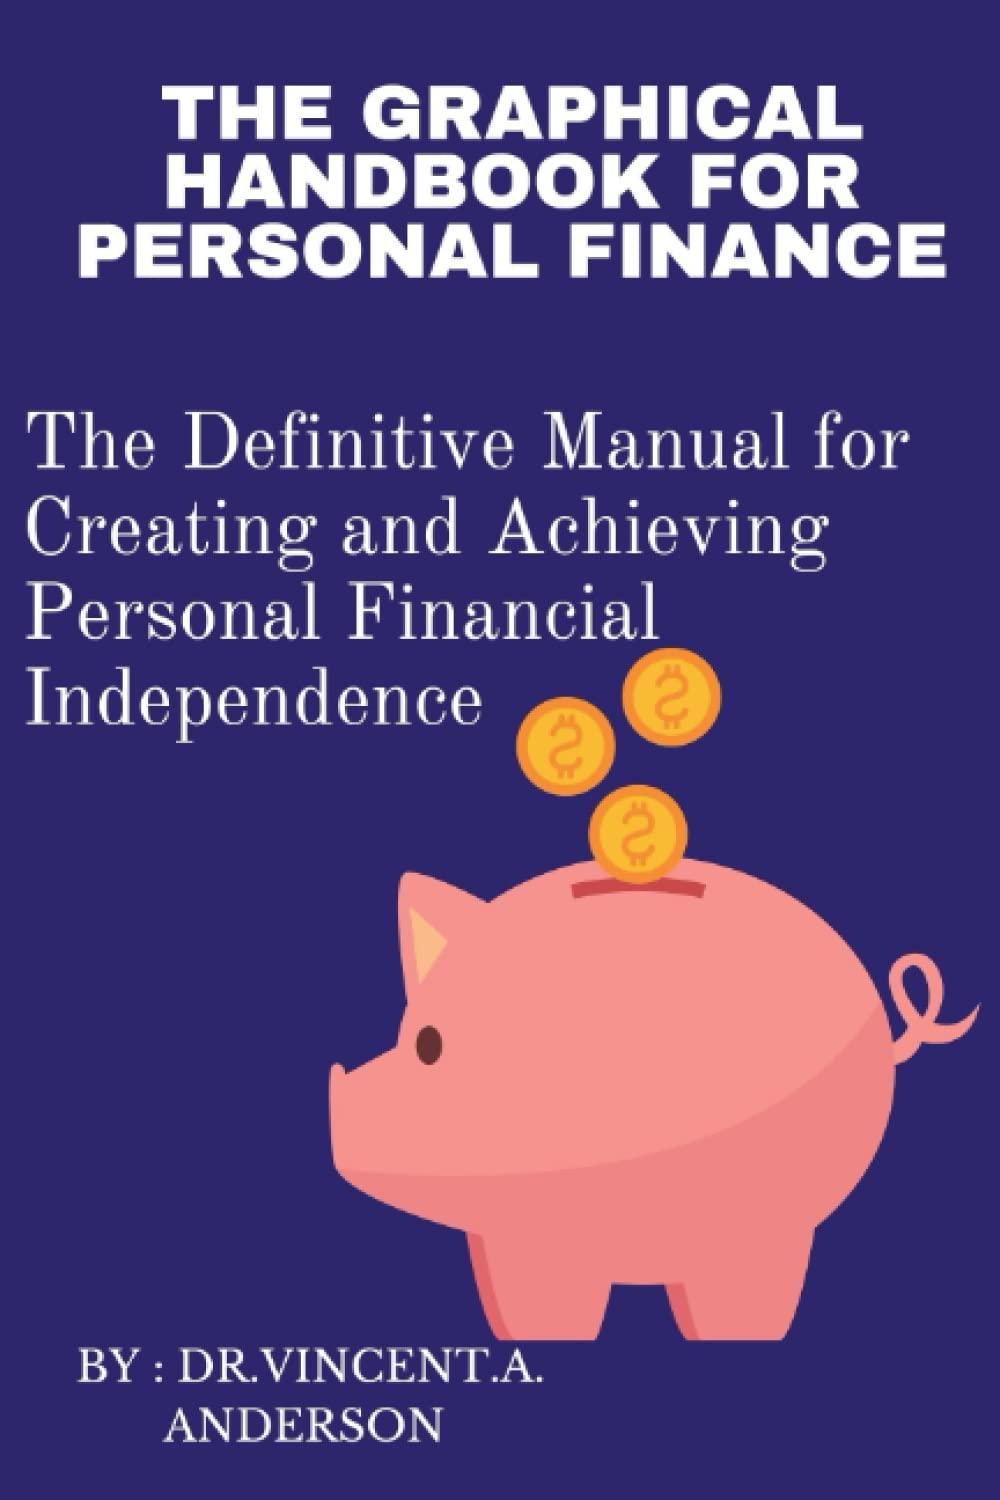 the graphical handbook of personal finance the definitive manual for creating and achieving personal